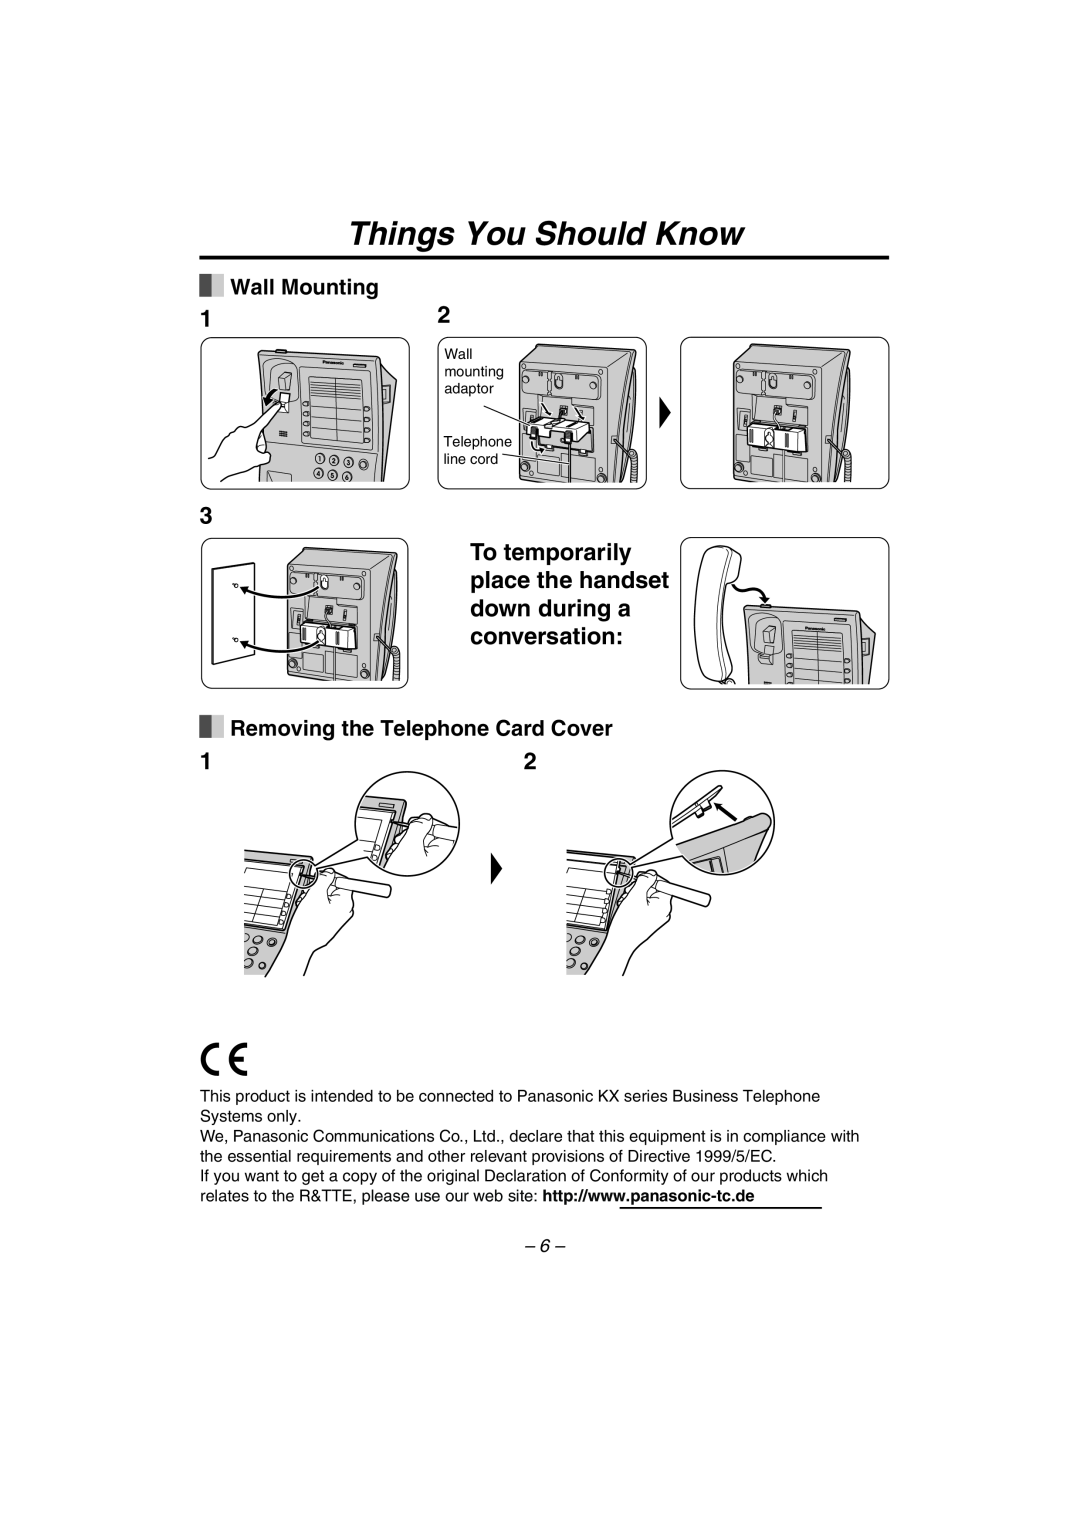 Panasonic KX-T7710 manual Things You Should Know, Wall Mounting, Removing the Telephone Card Cover 